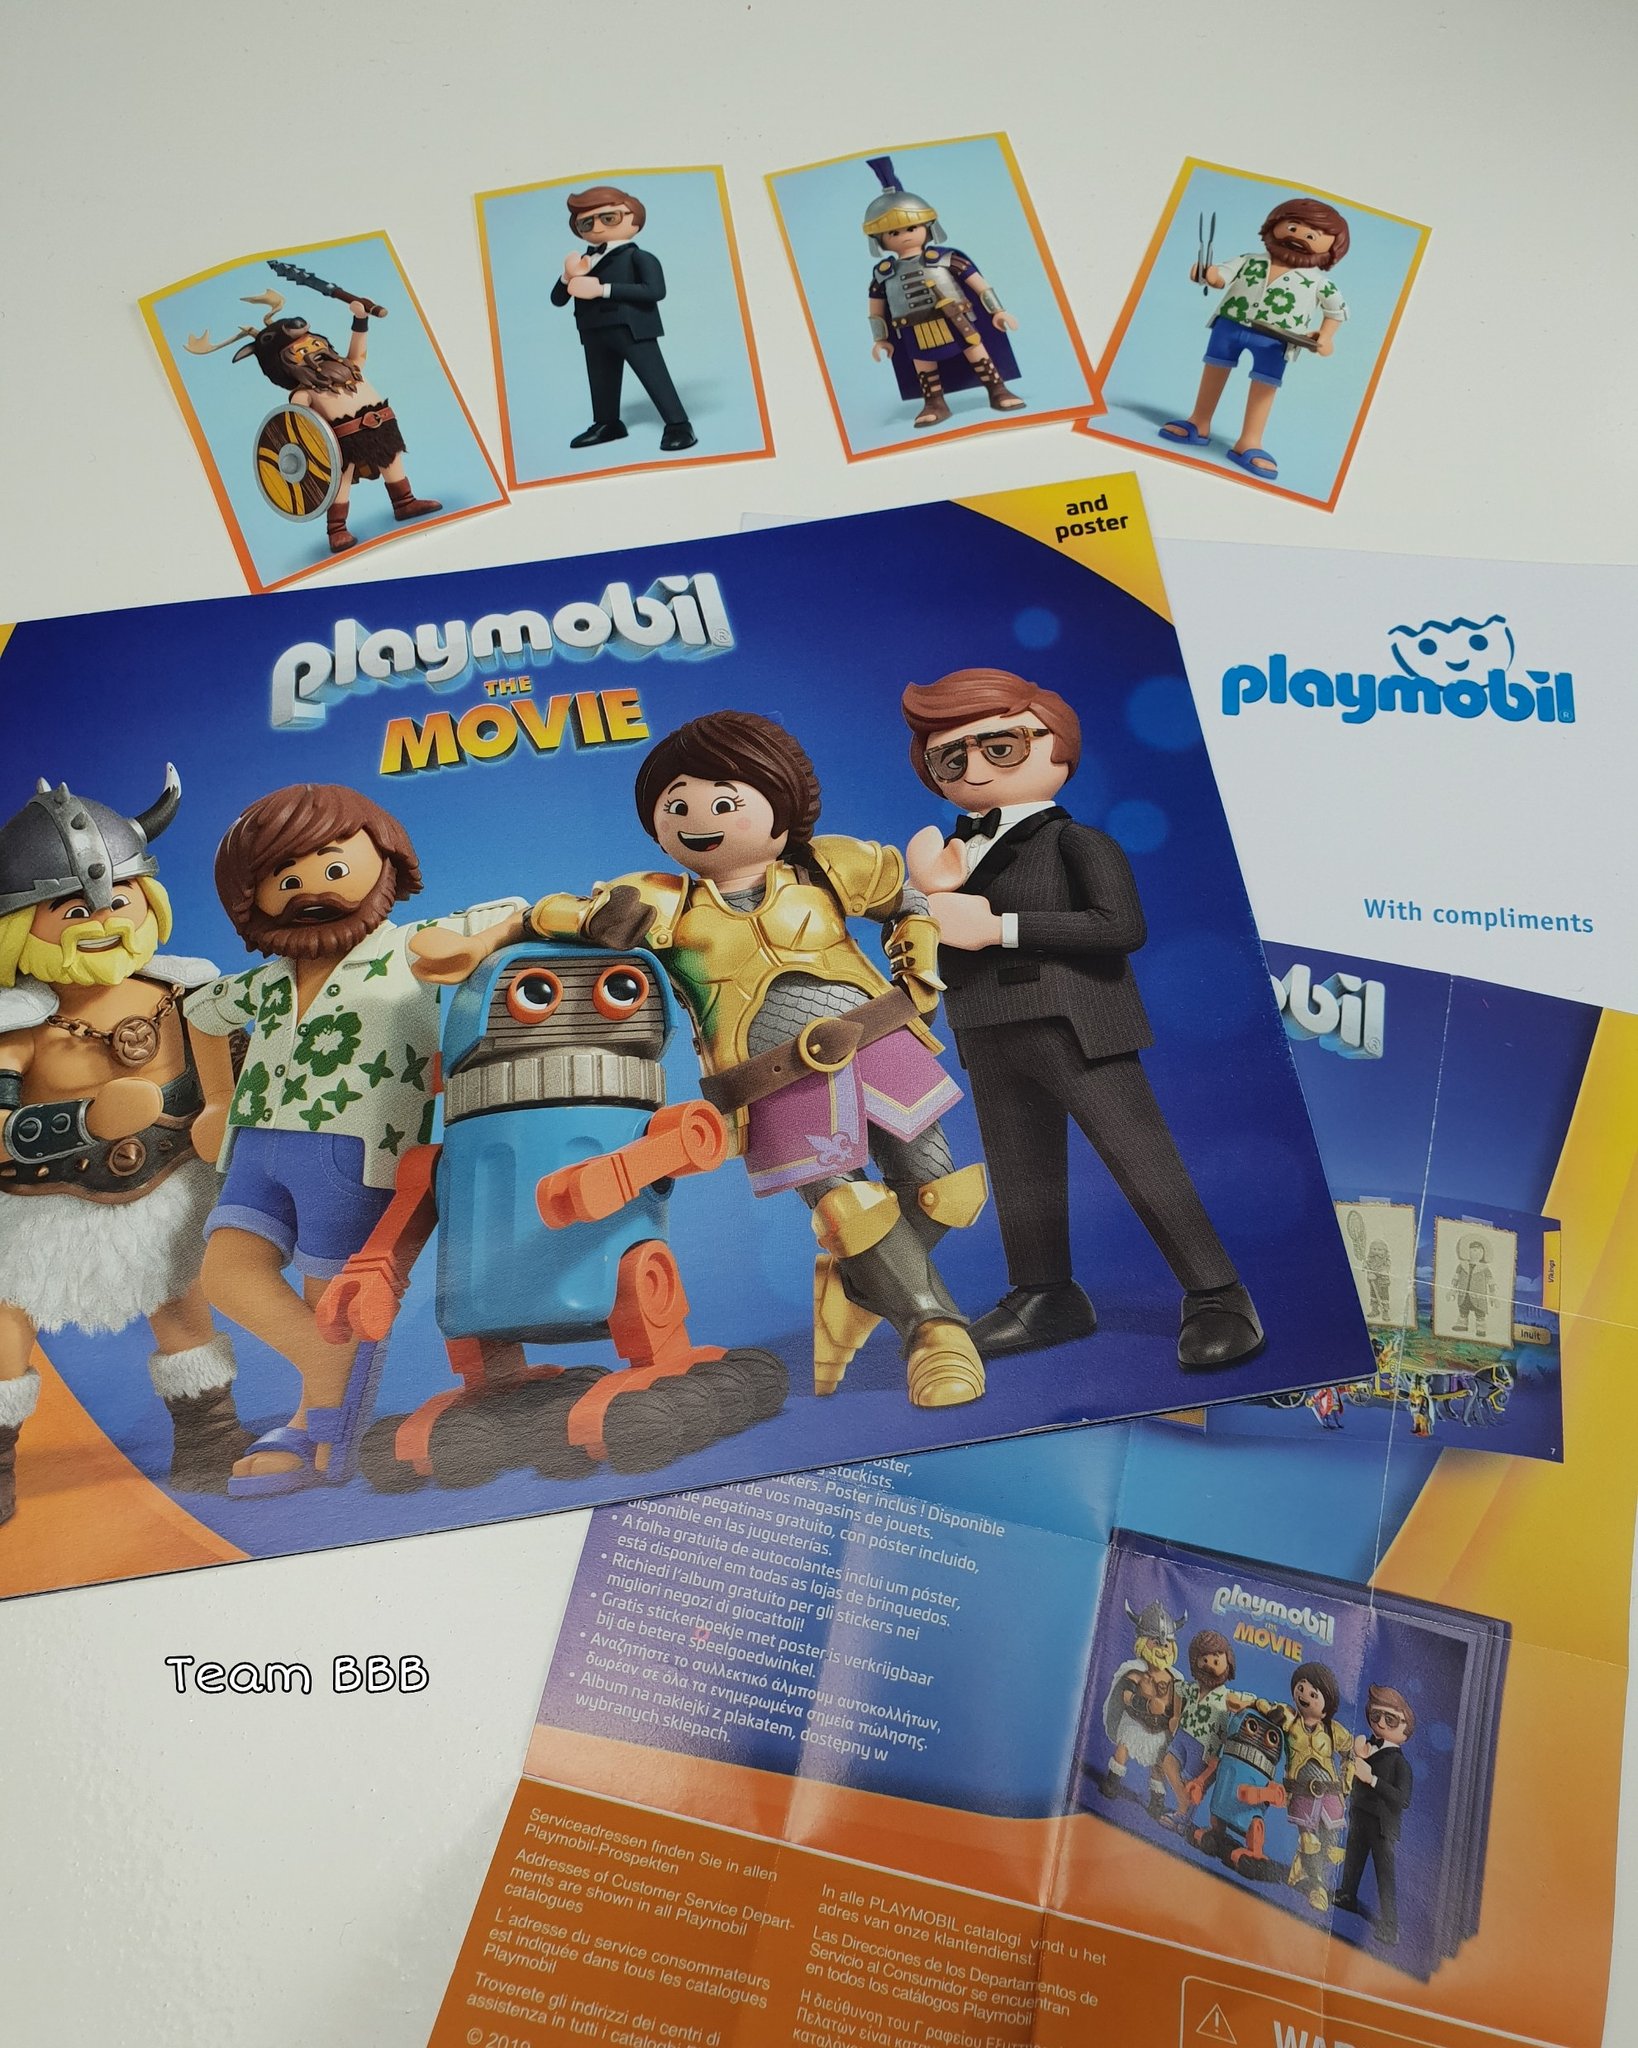 TeamBBB on Twitter: "Had troubles getting a sticker album for our Playmobil  stickers but the wonderful Gemma at Customer Services sent us 1 😄 # Playmobil #PlaymobilMovie #PlaymobilTheMovie #Stickers #RexDasher  #BloodBones #youtuber #animation #